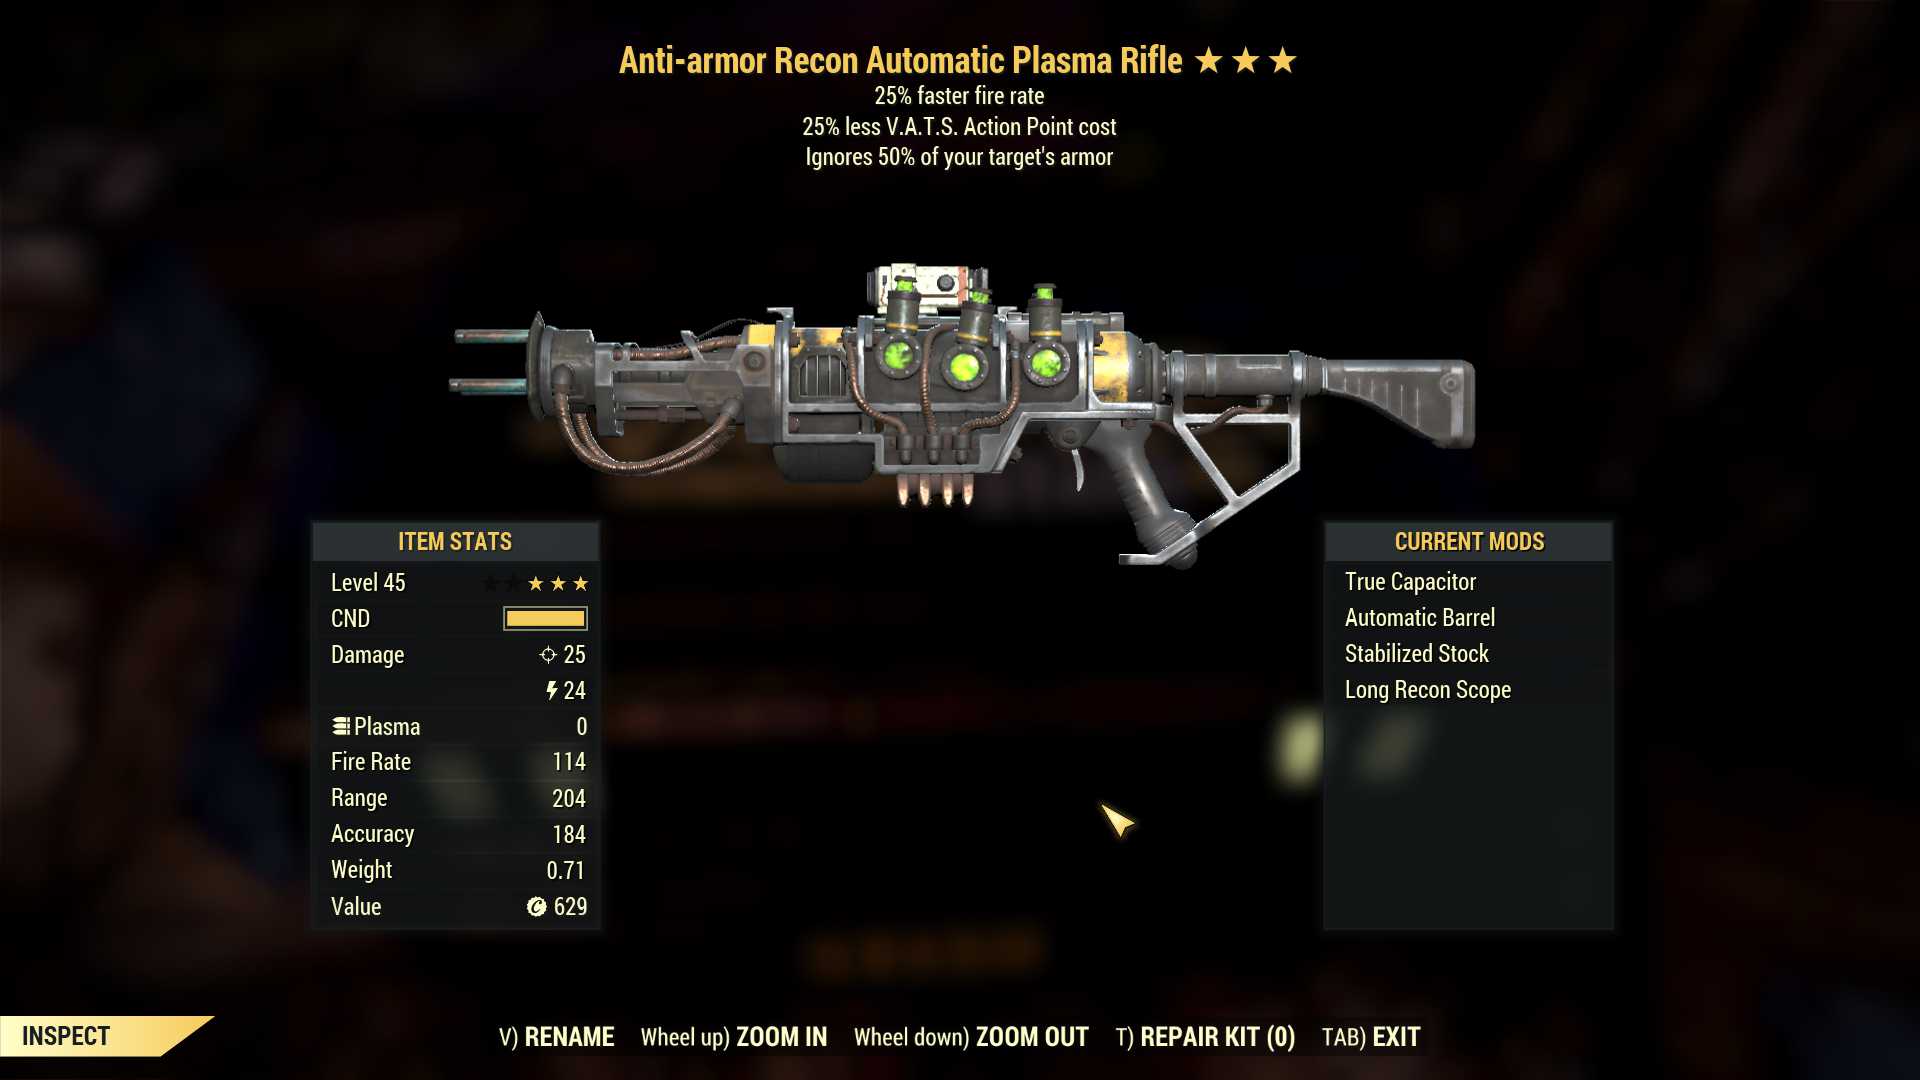 Anti-Armor Plasma rifle (25% faster fire rate, 25% less VATS AP cost)